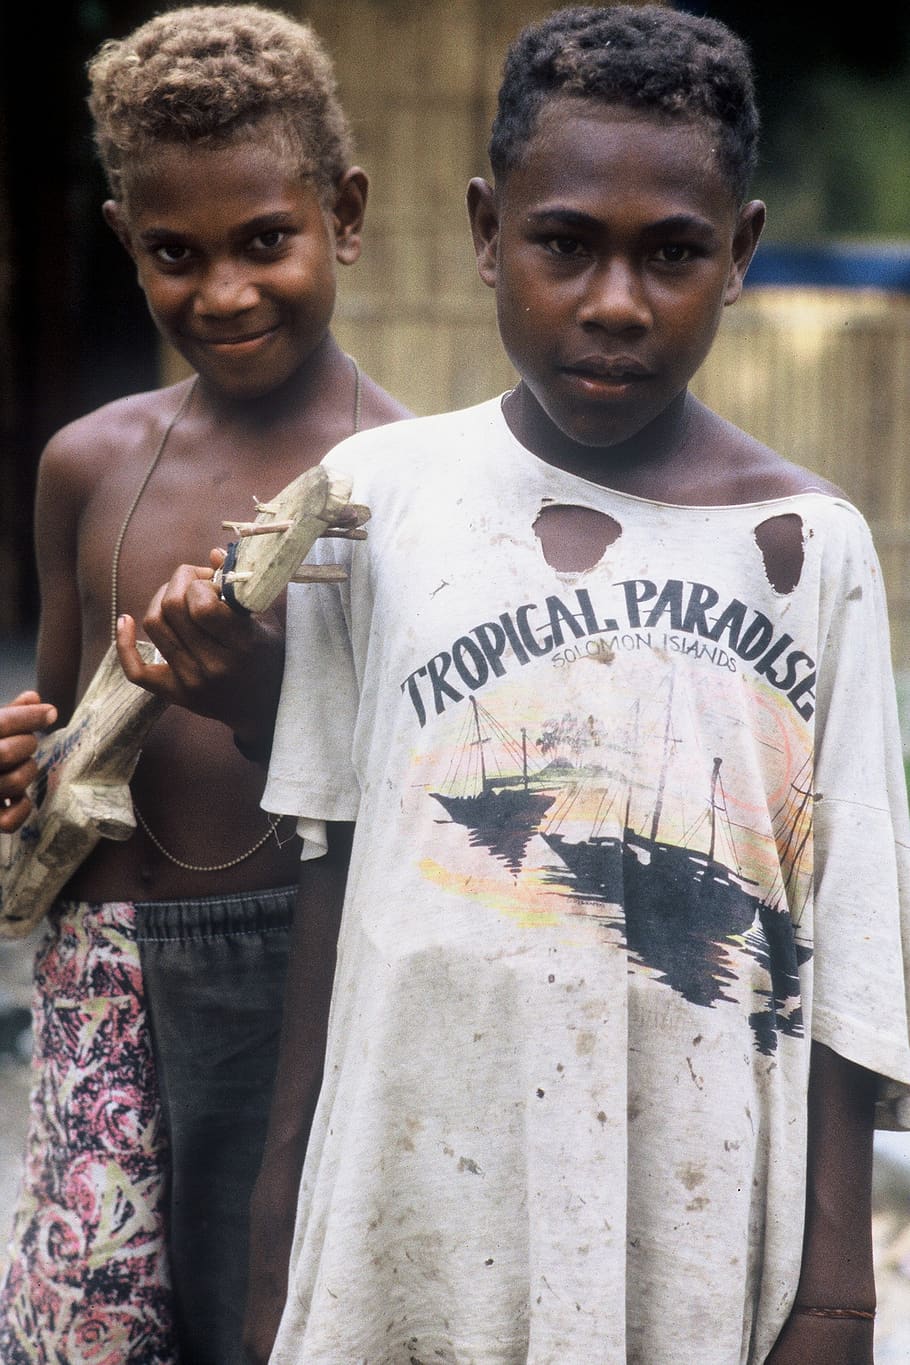 poverty, the solomon islands, rags, happy, children, looking at camera, portrait, real people, boys, front view